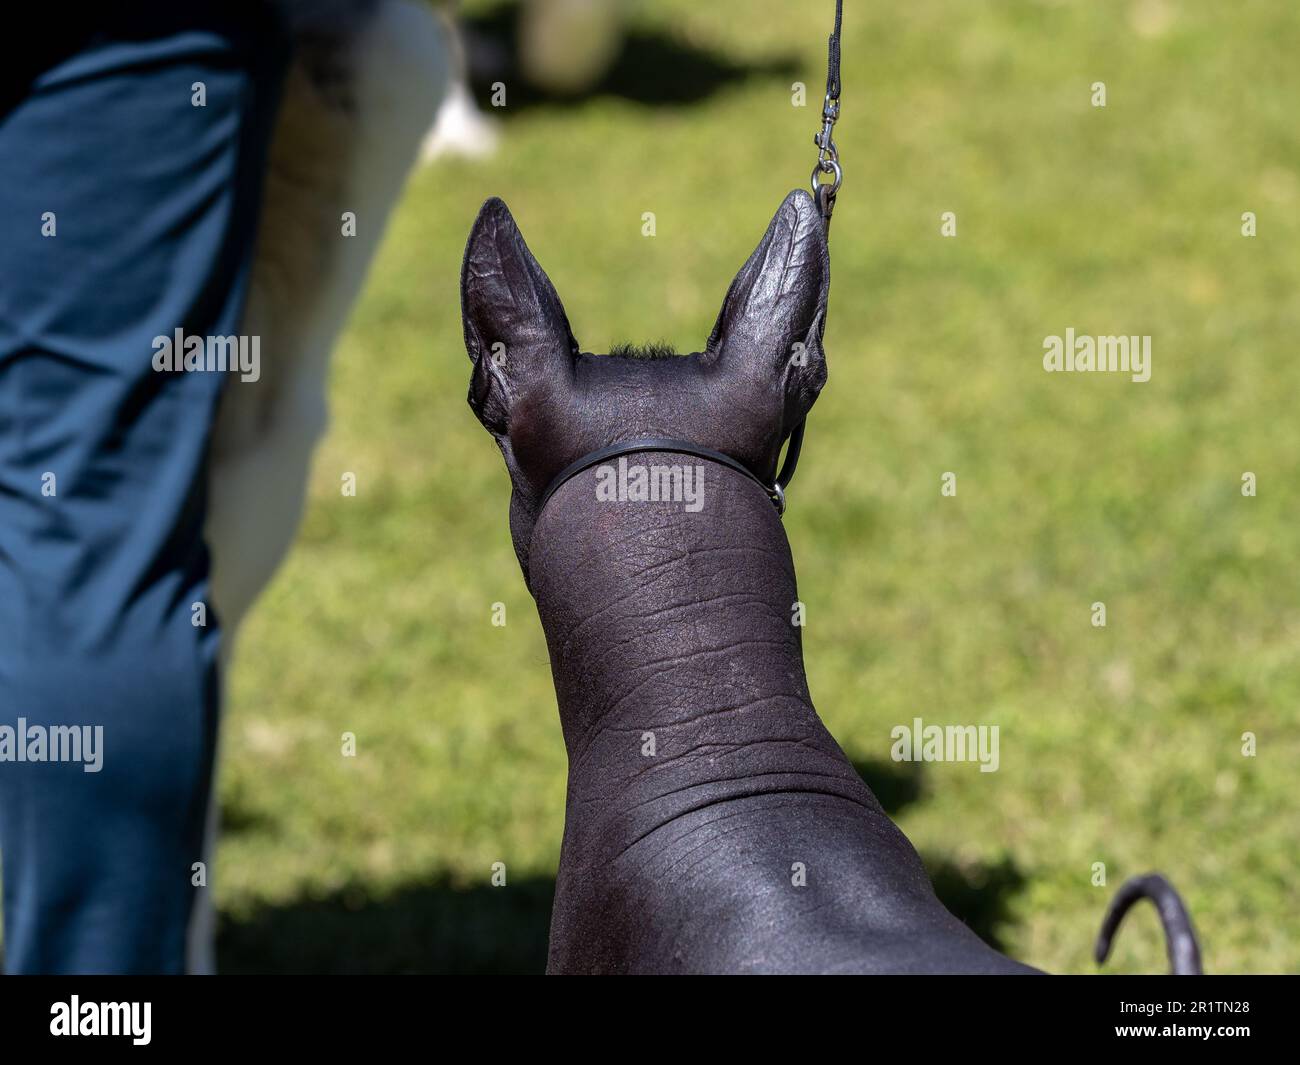 Xoloitzcuintle o xolo mexican hairless back dog being held on leash by owner Stock Photo